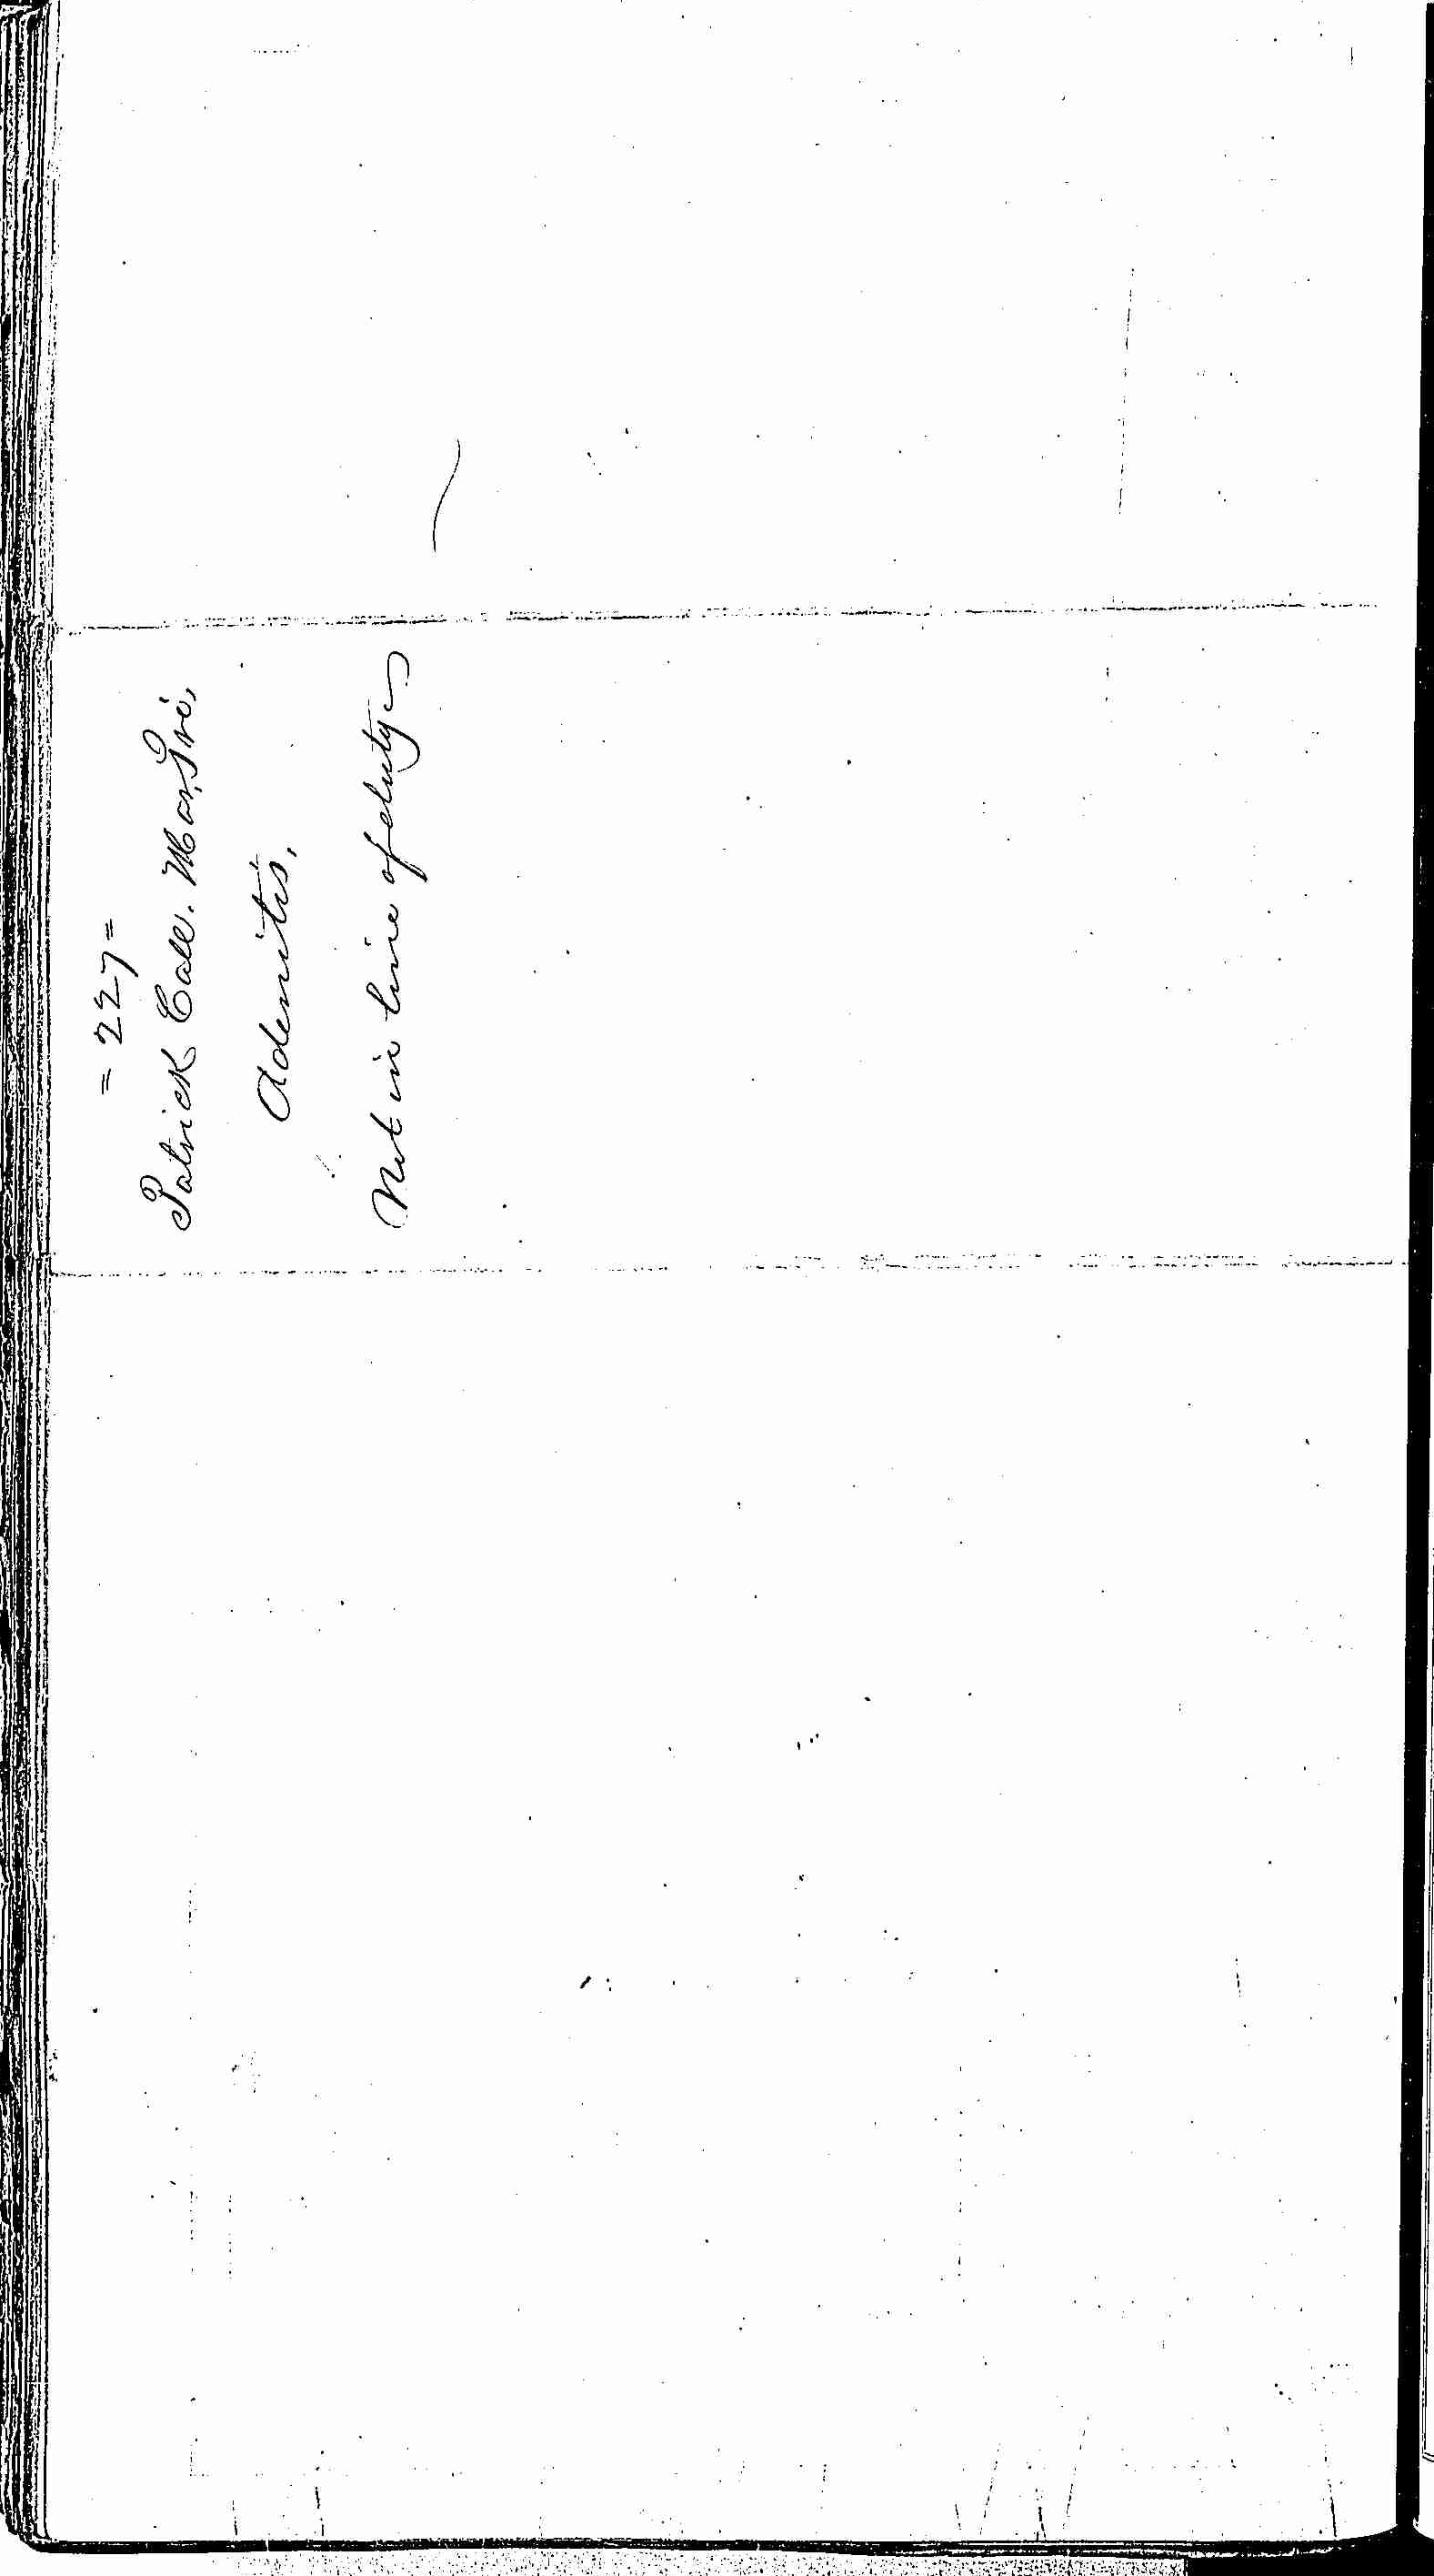 Entry for Patrick Call (page 2 of 2) in the log Hospital Tickets and Case Papers - Naval Hospital - Washington, D.C. - 1866-68